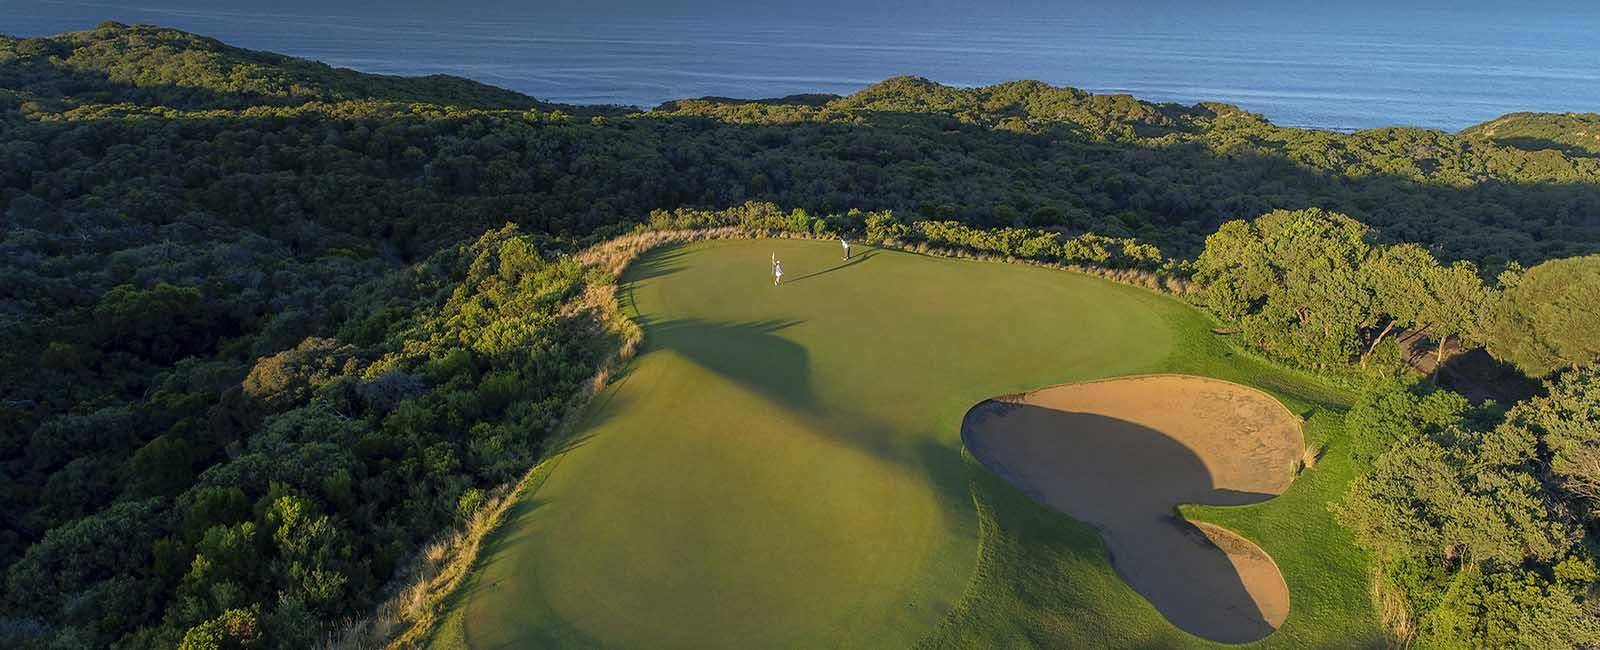 The 7th Hole at the National Golf Club, Mornington Peninsula, Victoria | Golf among the grapes